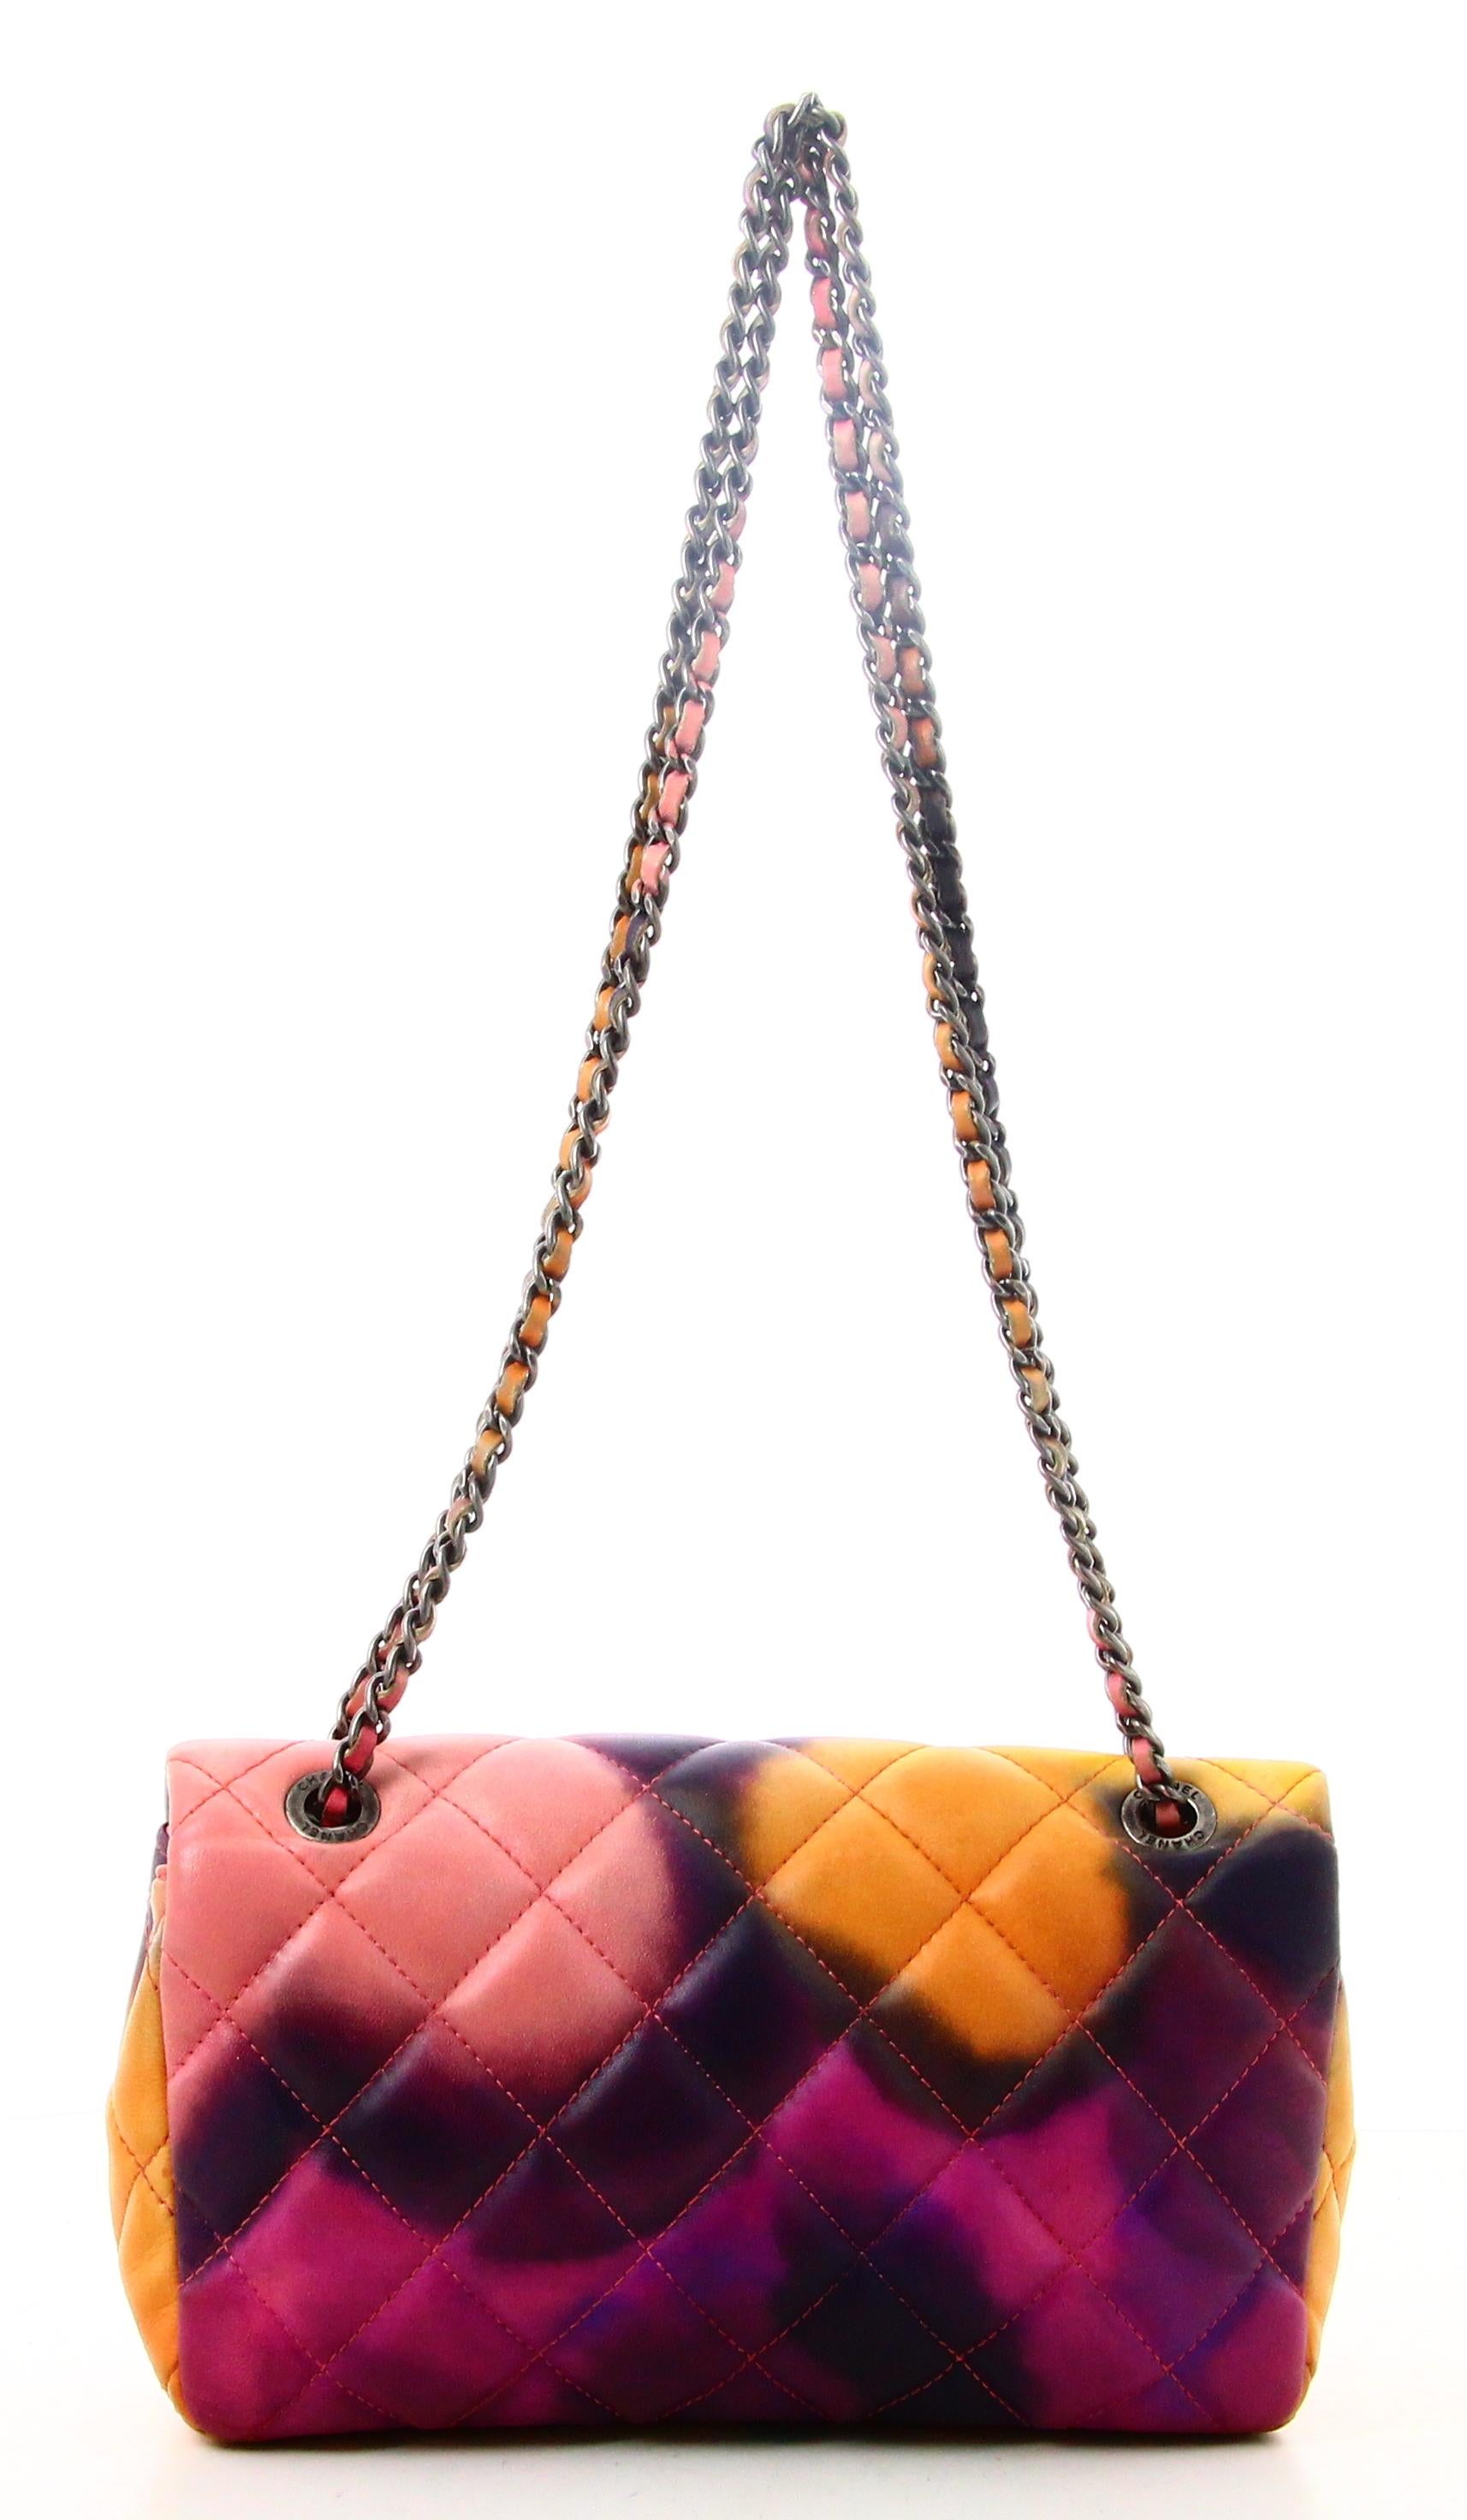 2015 Chanel Timeless Handbag Grafitti Multicolor Quilted Leather  For Sale 2